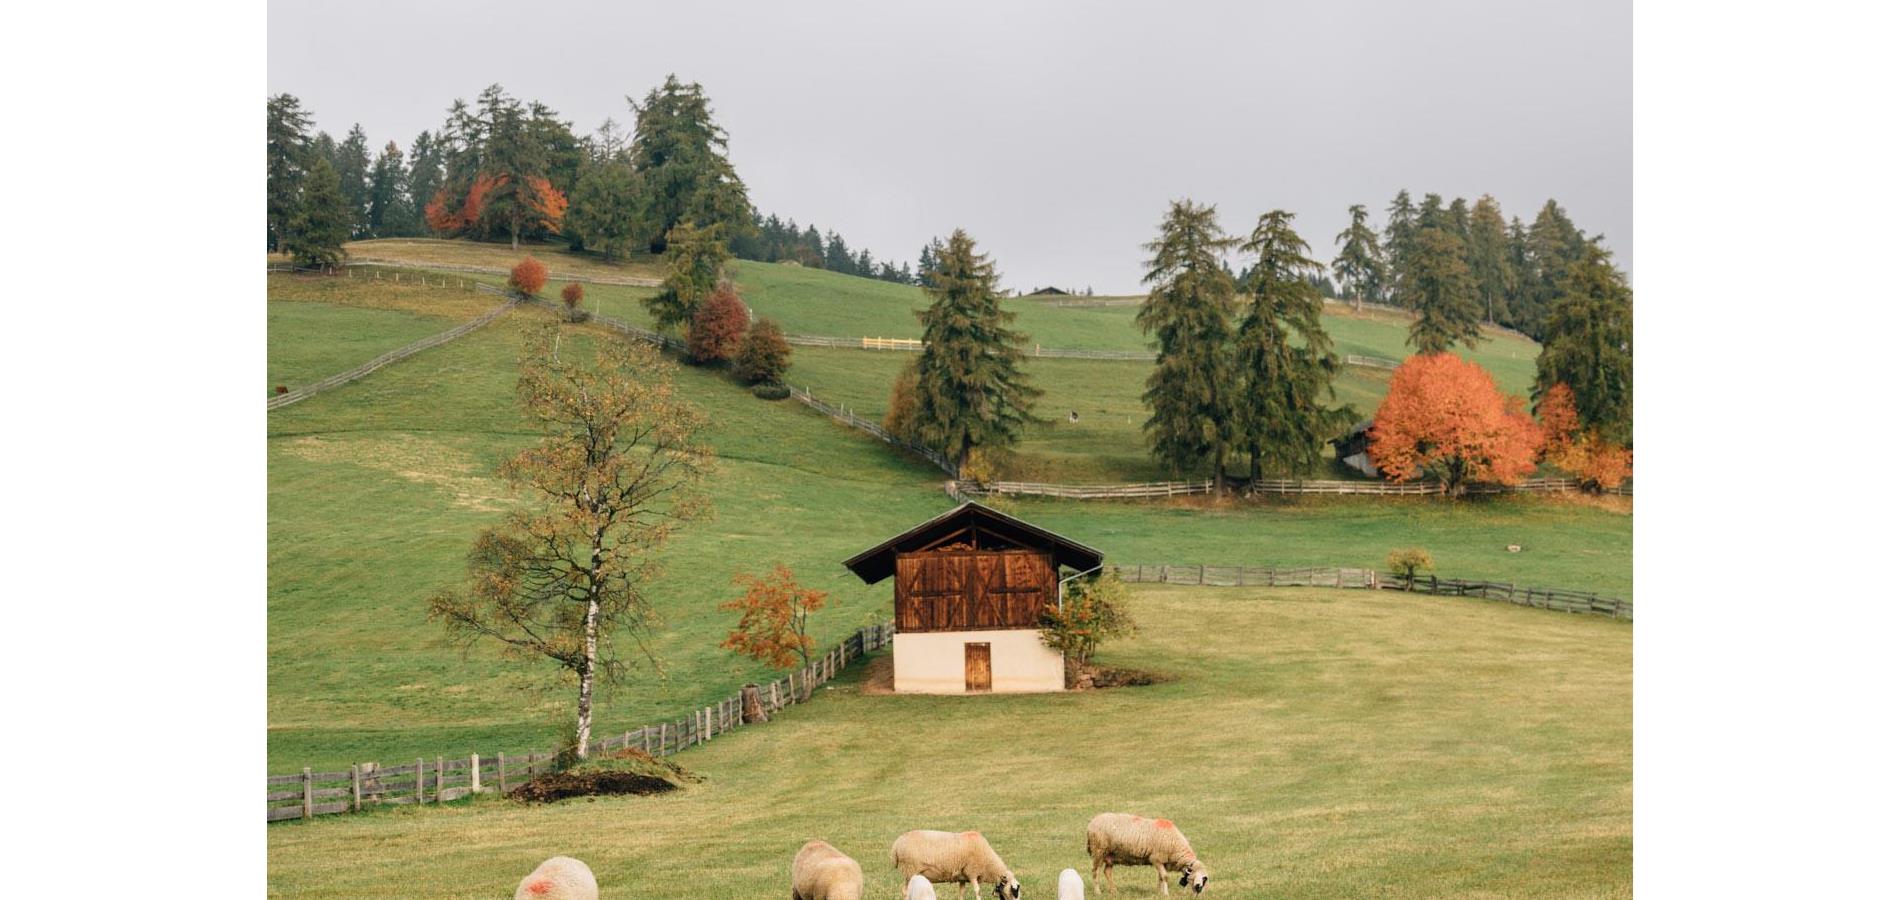 Our alpine pastures: place of recreation and habitat